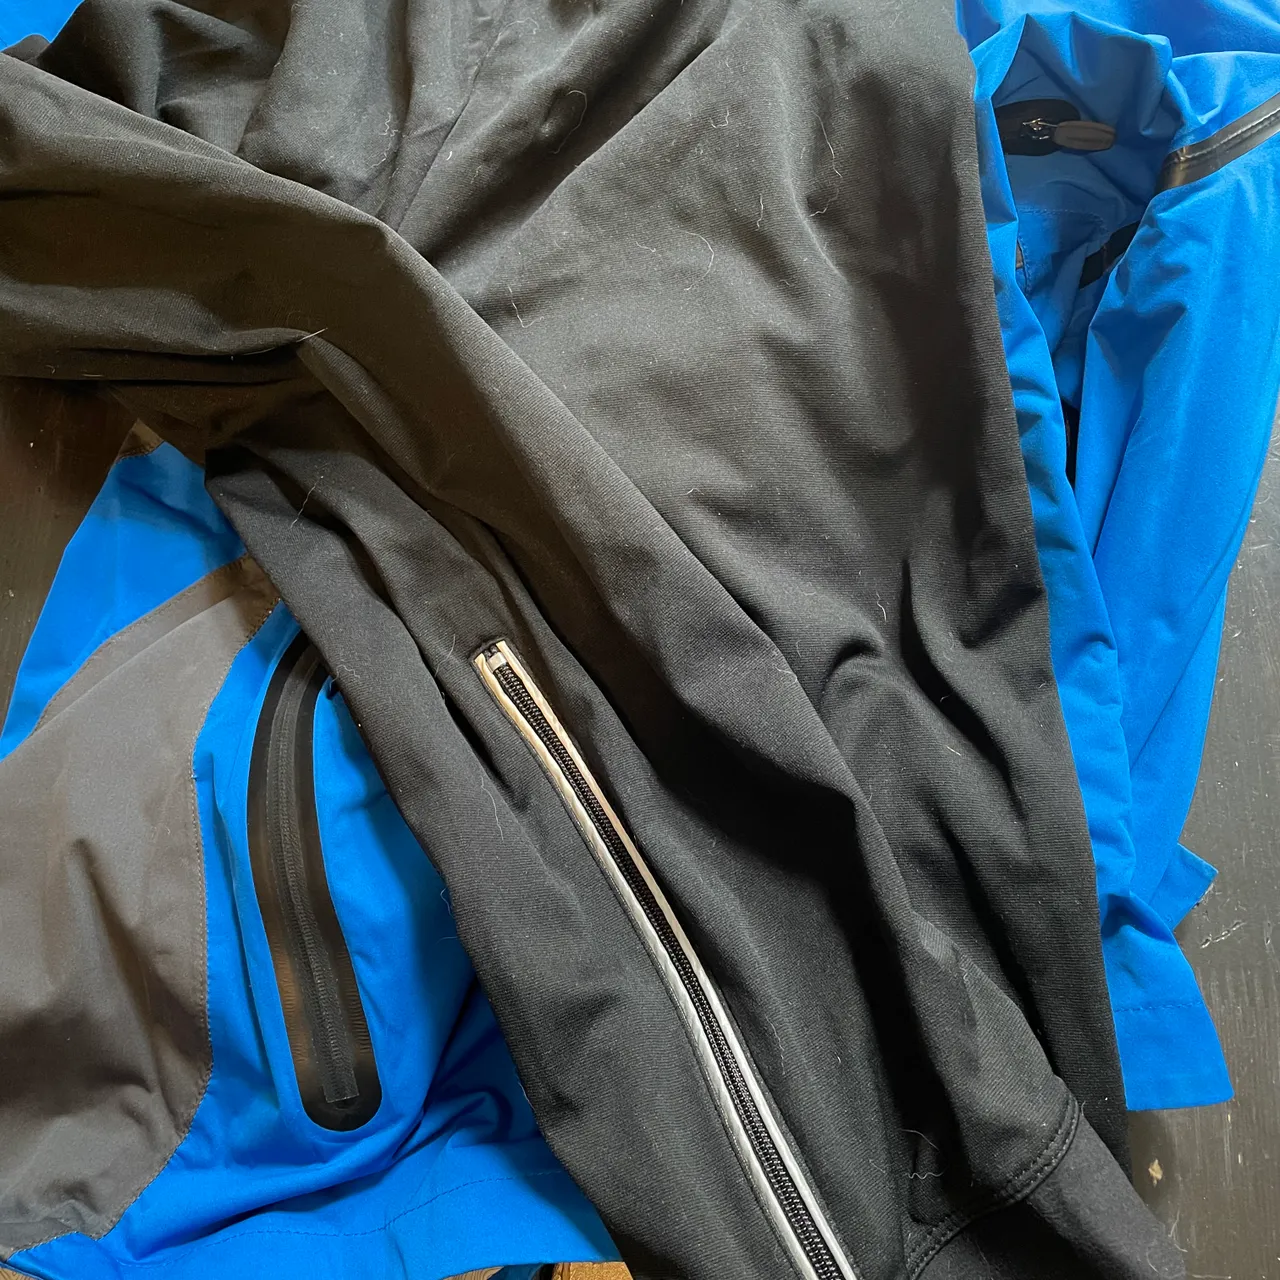 Cycling jacket and pants for wet weather photo 4